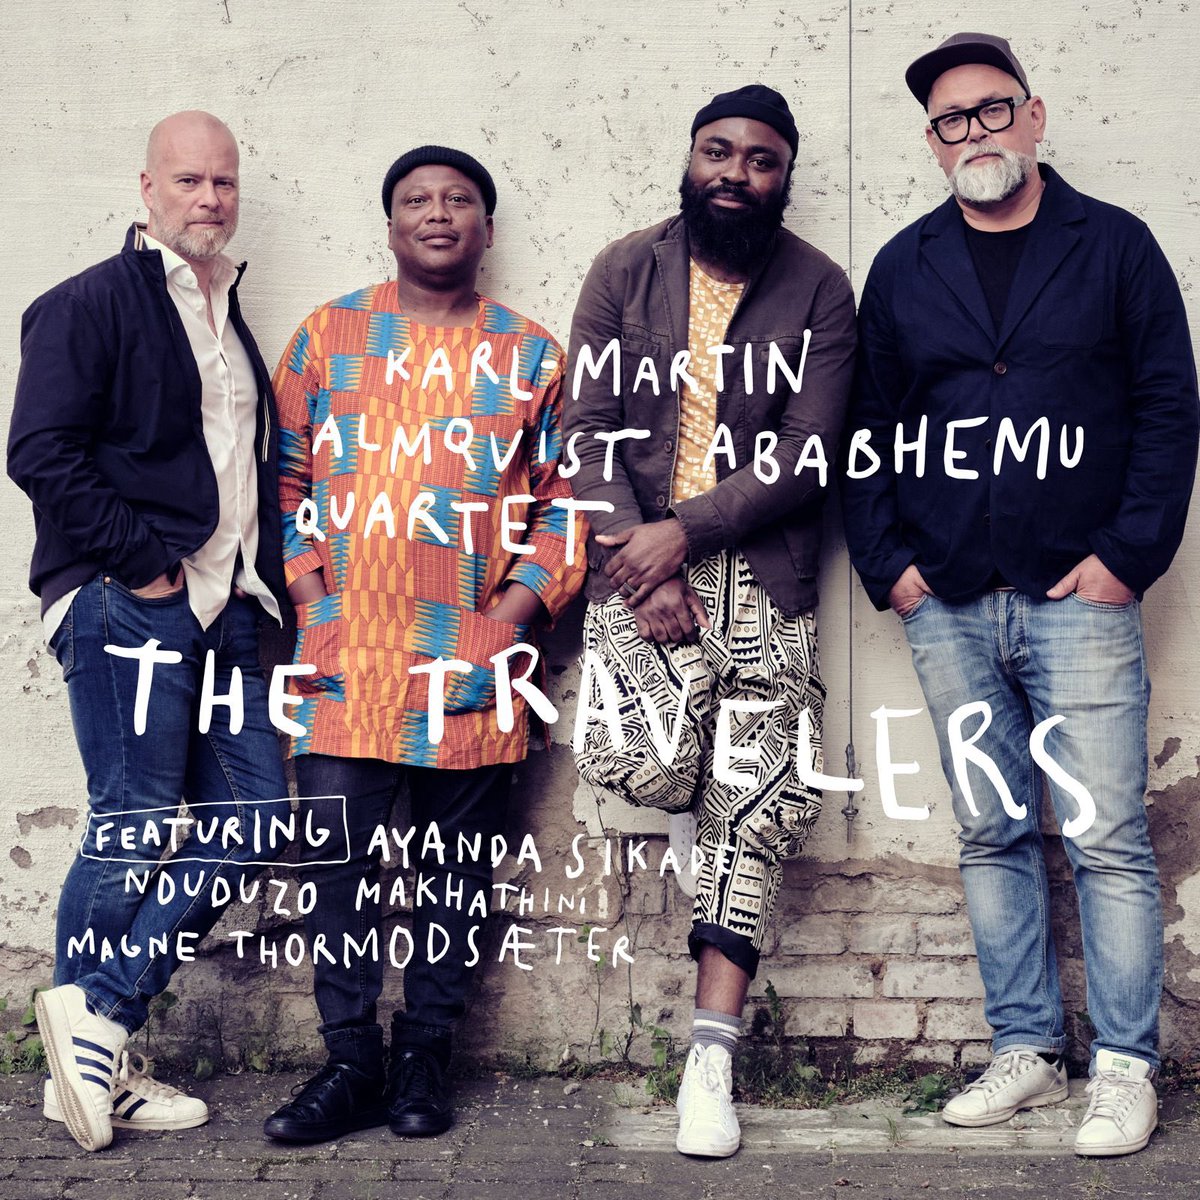 #NewMusicAlert The seed for this quartet and recording was sown back in 2014 Putting forward the message of brotherhood across colored lines, and across geography. 'Ababhemu Quartet” plays against the history of coloniality and placing the sound in the center of how we can